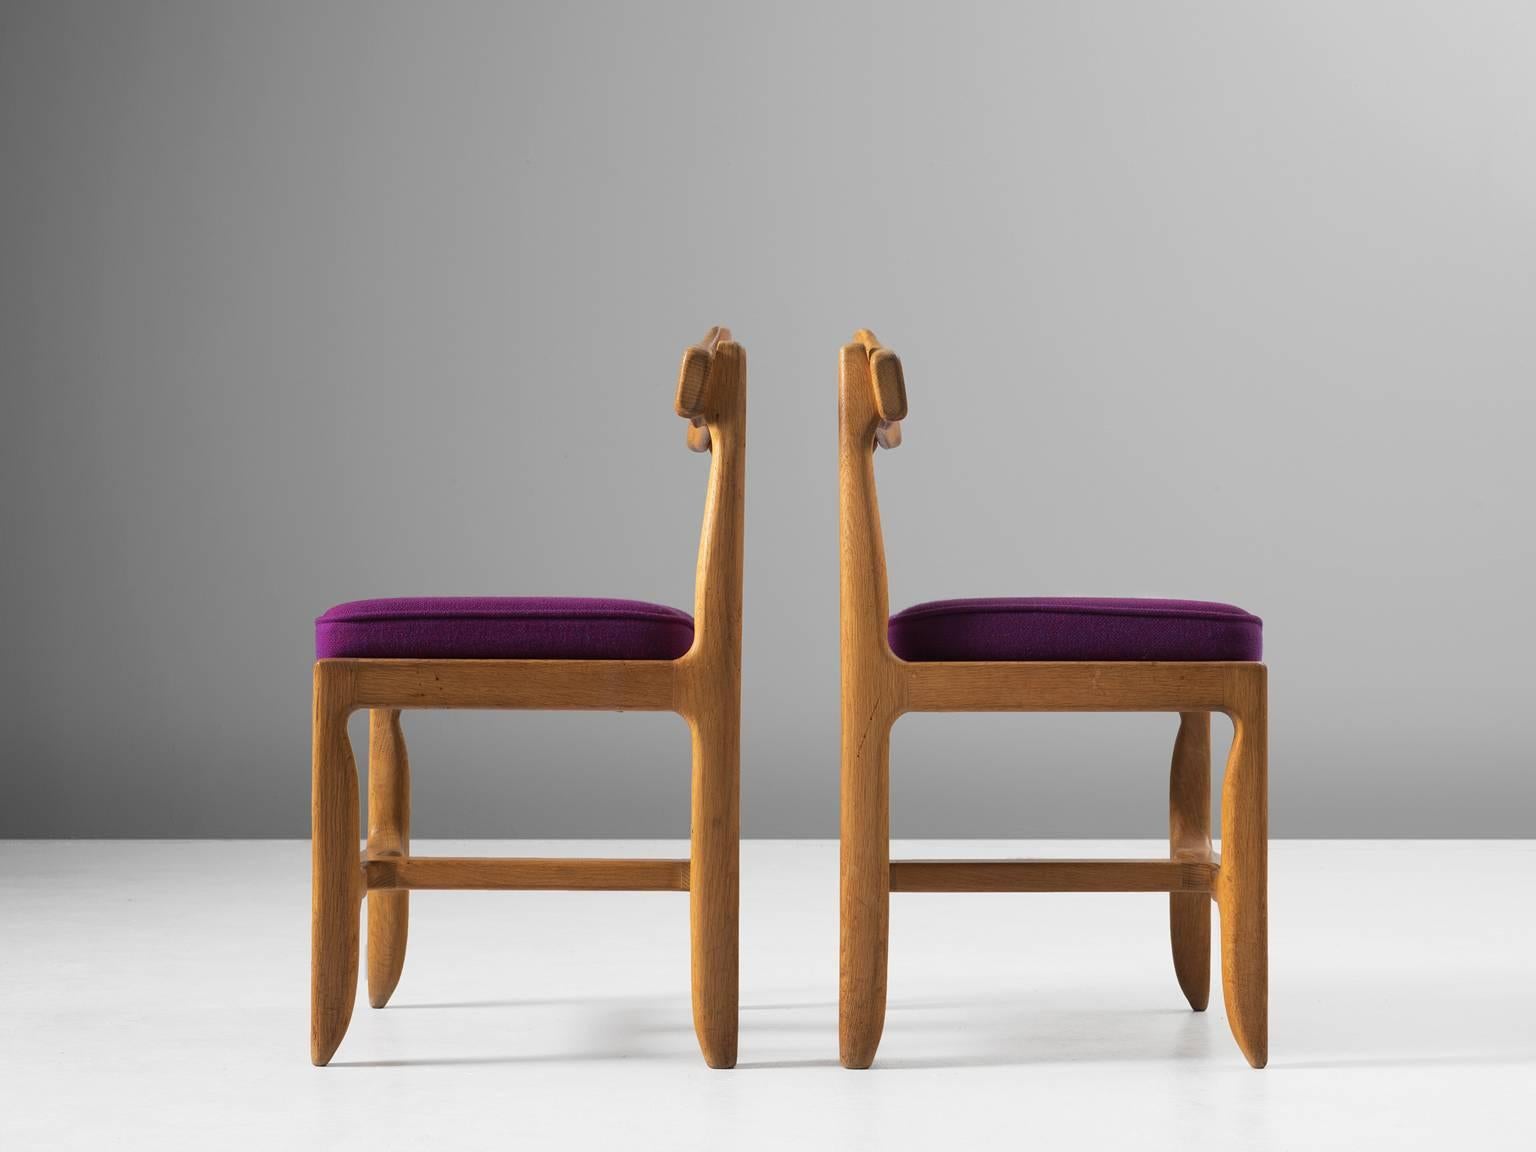 Dining chairs, solid oak, purple upholstery, 1960s.

These distinctive chair in beautifully patinated oak is by the French designer duo Jacques Chambron (1914-2001) and Robert Guillerme (1913-1990). These dining chair shows organic, tender lines